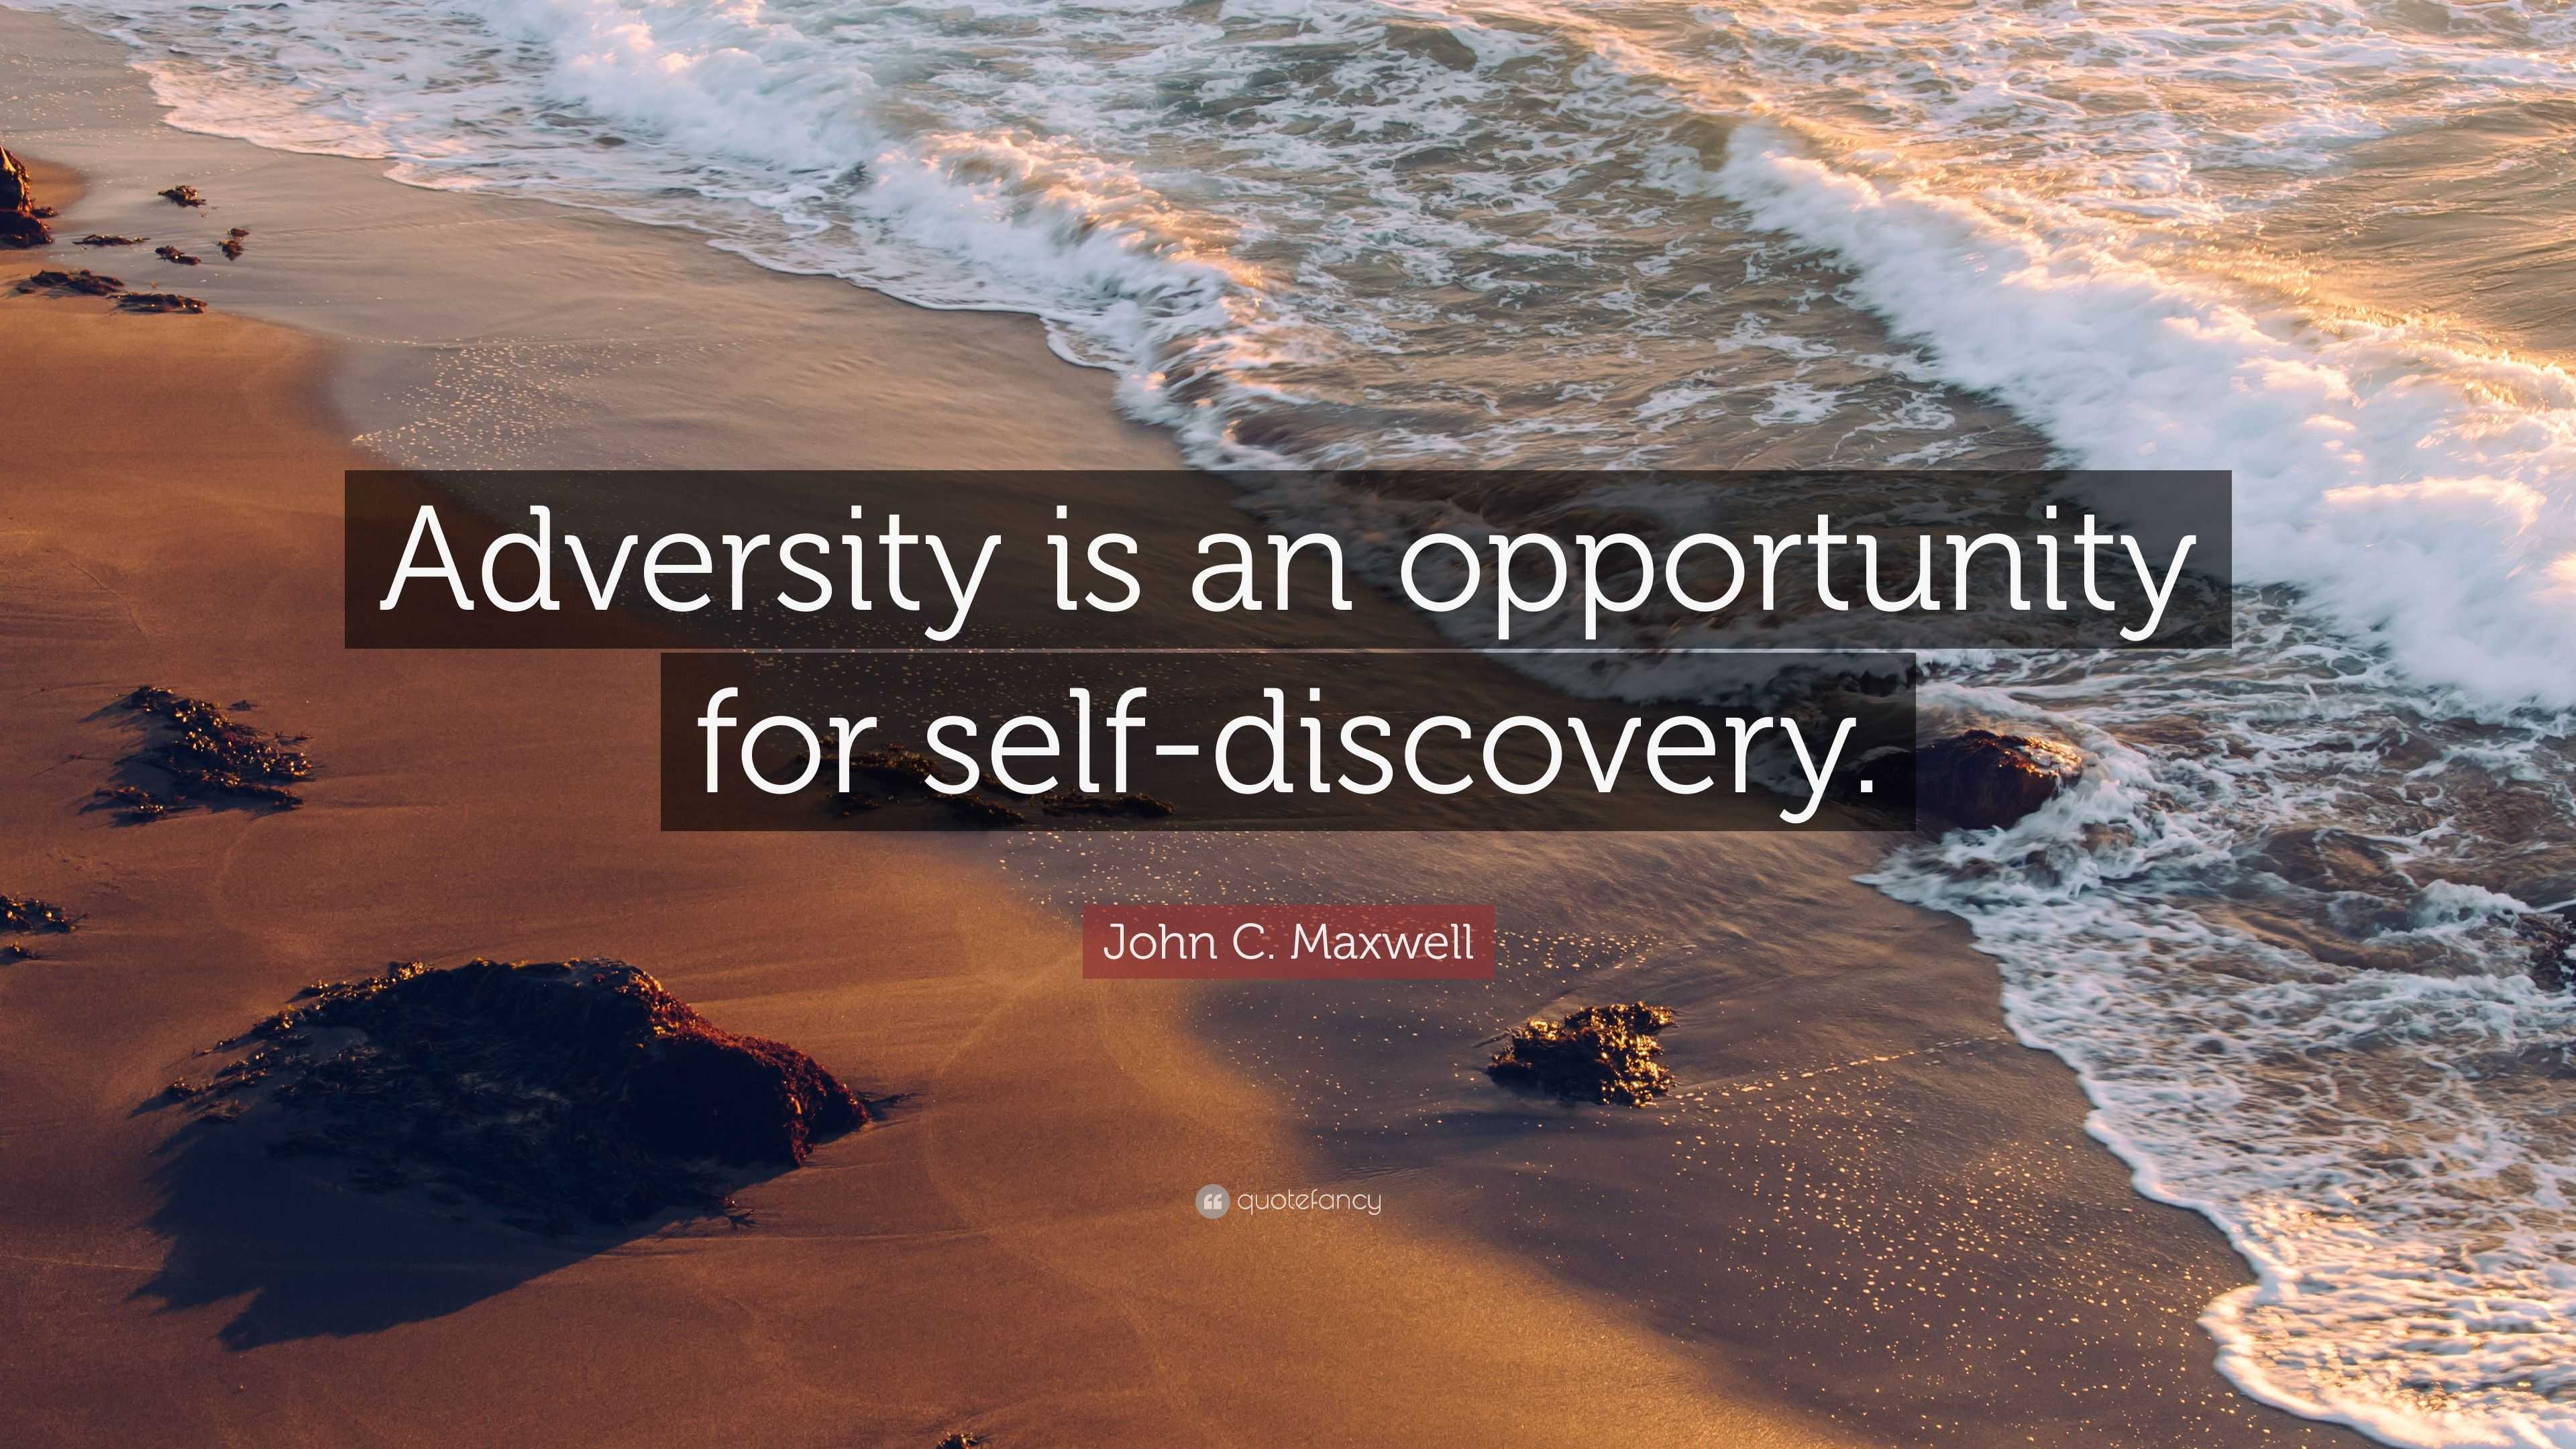 John C. Maxwell Quote “Adversity is an opportunity for